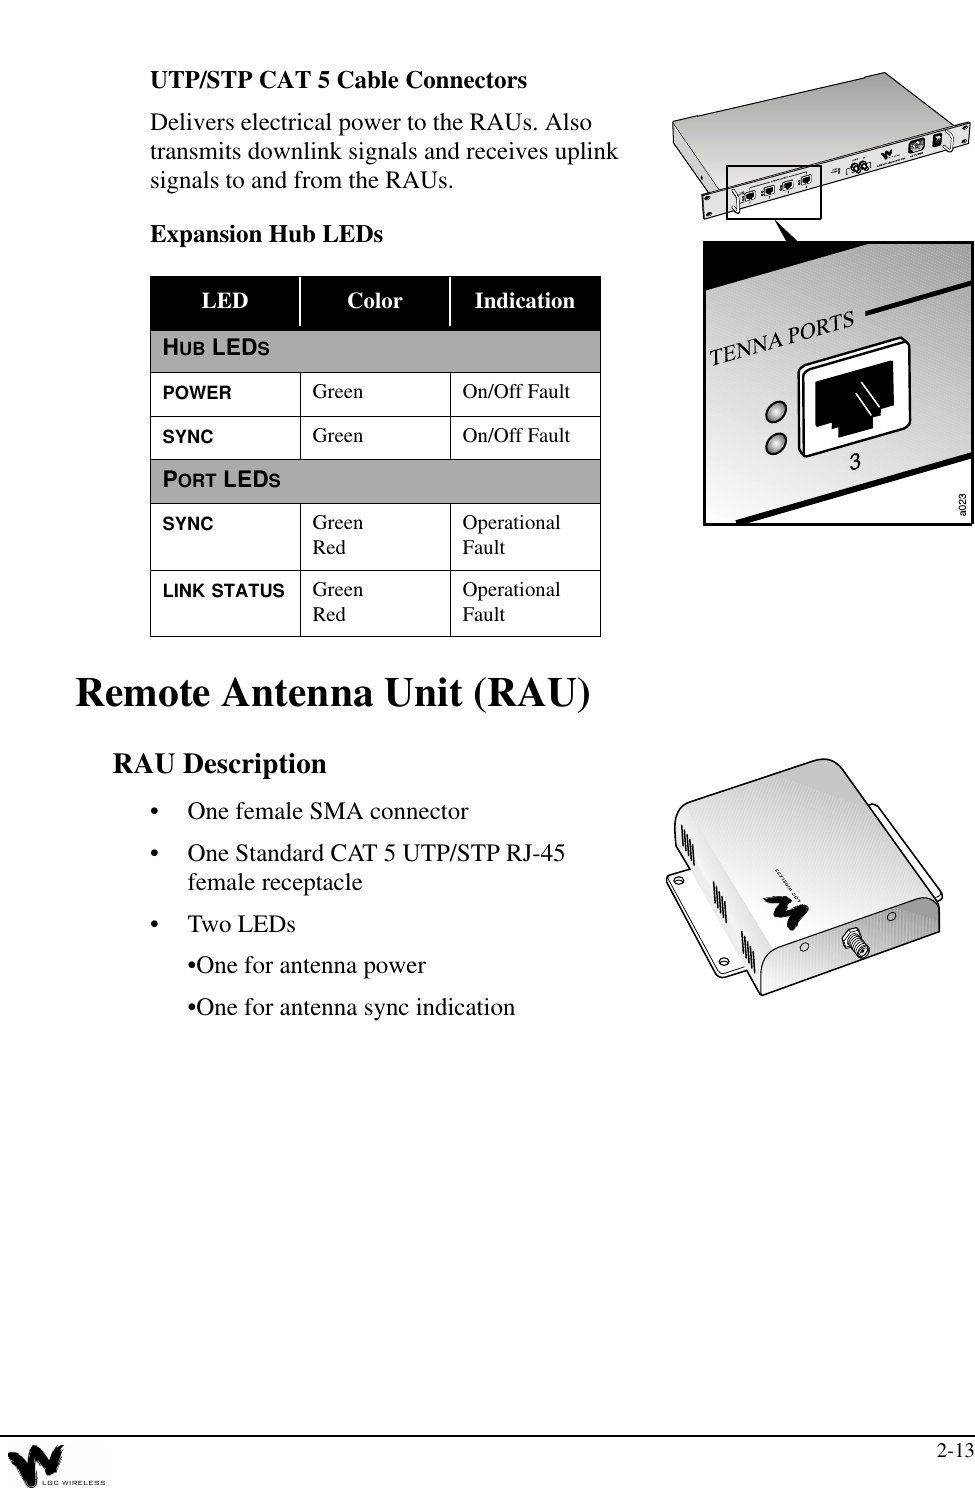 2-13UTP/STP CAT 5 Cable ConnectorsDelivers electrical power to the RAUs. Also transmits downlink signals and receives uplink signals to and from the RAUs.Expansion Hub LEDsRemote Antenna Unit (RAU)RAU Description•One female SMA connector•One Standard CAT 5 UTP/STP RJ-45 female receptacle•Two LEDs•One for antenna power•One for antenna sync indicationLED Color IndicationHUB LEDSPOWER Green On/Off FaultSYNC Green On/Off FaultPORT LEDSSYNC GreenRed OperationalFaultLINK STATUS GreenRed OperationalFault